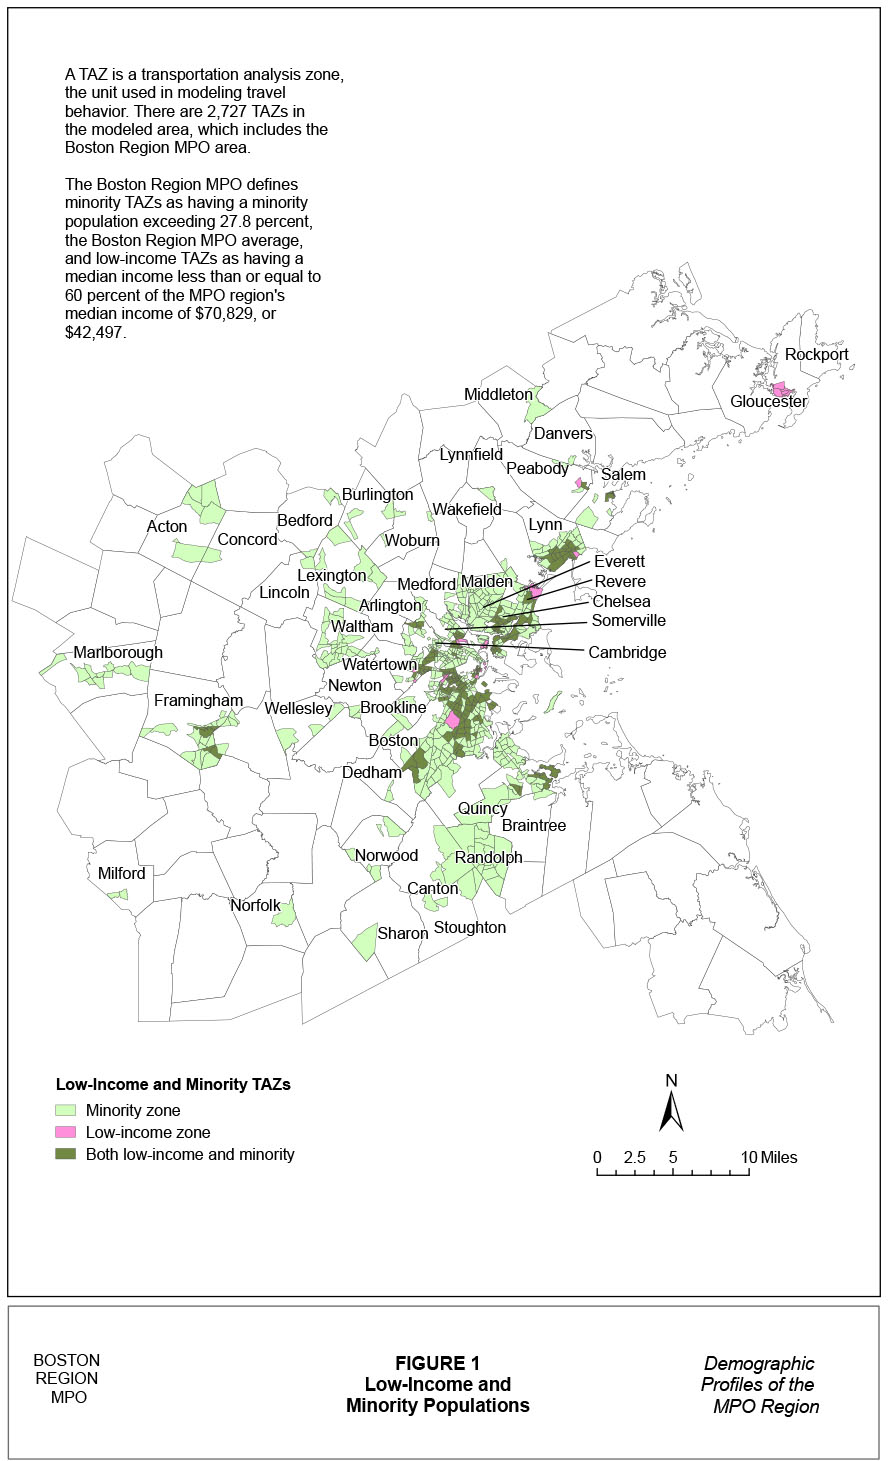 This figure is a map titled “Low-Income and Minority Populations” In the corner of the figure, there are explanations of what a TAZ is and of how the Boston Region MPO defines a minority TAZ and how it defines a low-income TAZ. A TAZ is a transportation analysis zone, the unit used in modeling travel behavior. There are 2,727 TAZs in the MPO’s modeled area, which includes the Boston Region MPO area. The Boston Region MPO defines a minority TAZ as one that has a minority population exceeding 27.8 percent, which is the Boston Region MPO average, and a low-income TAZ as one that has a median income less than or equal to 60 percent of the MPO region's median income of $70,829, or $42,497. The map uses colors to show the locations of minority transportation analysis zones (TAZs), low-income TAZs, and TAZs that are both low-income and minority.

